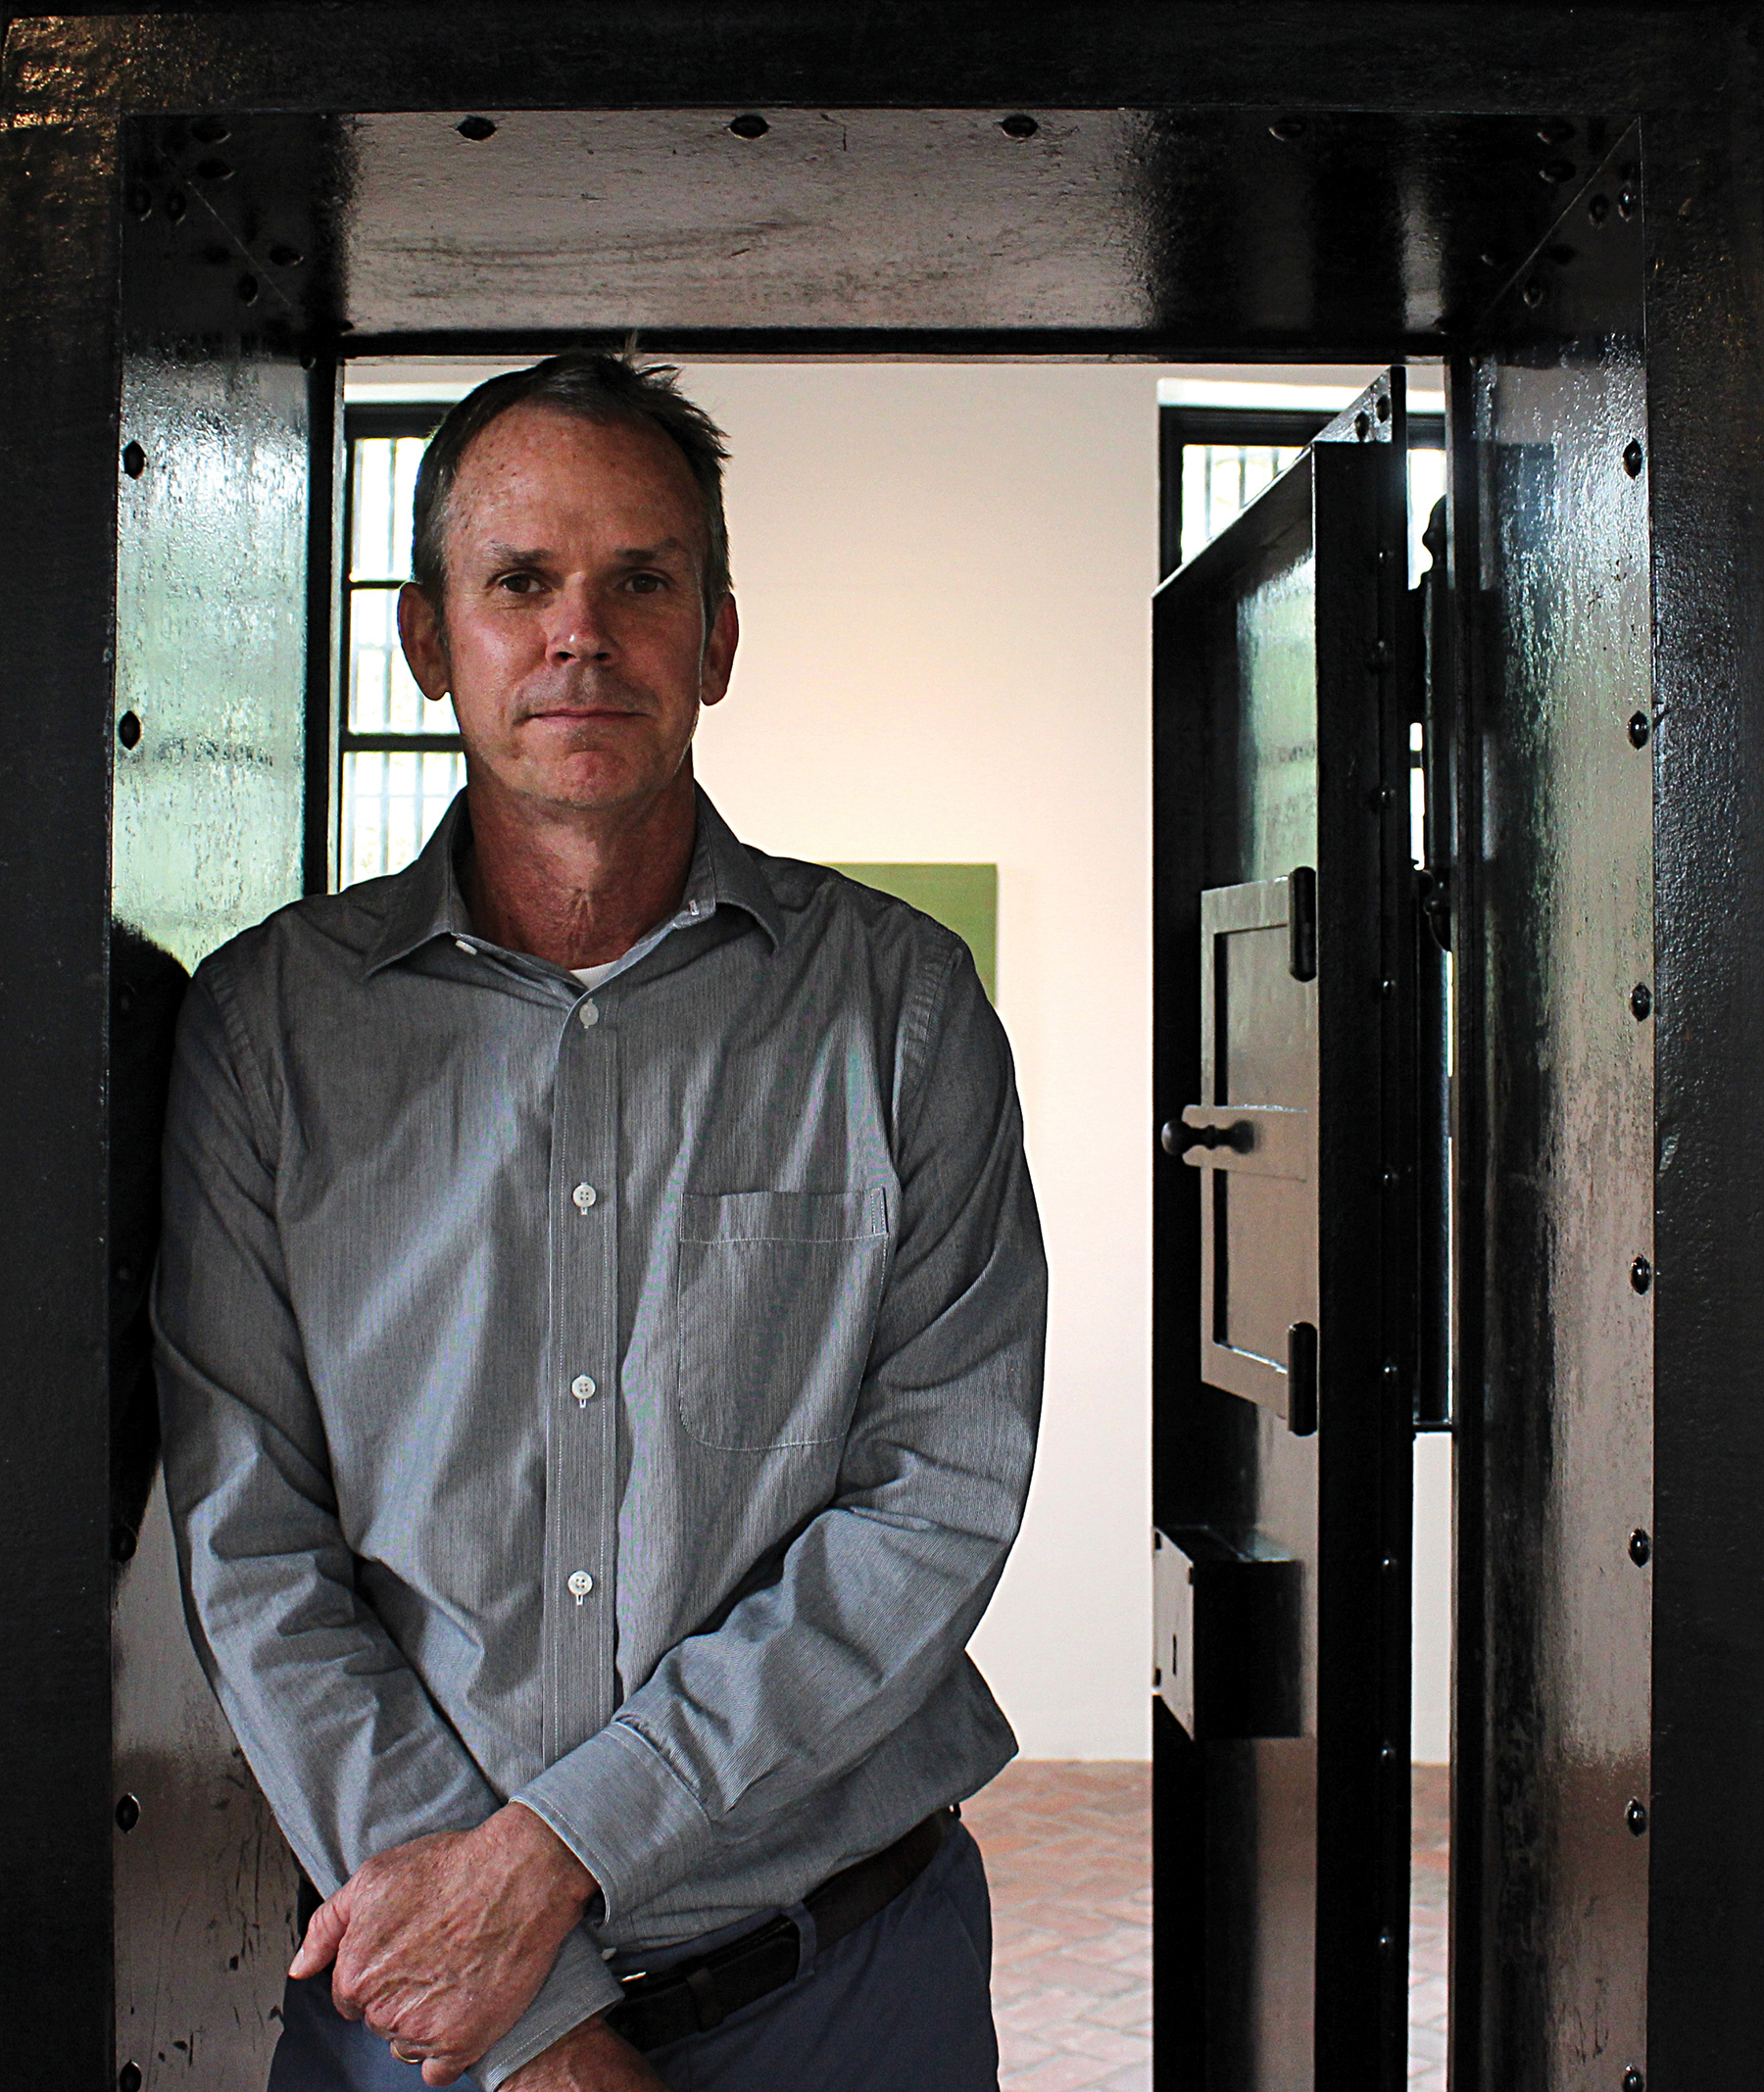 Executive Director Patrick Kelly stands in the old jail building.